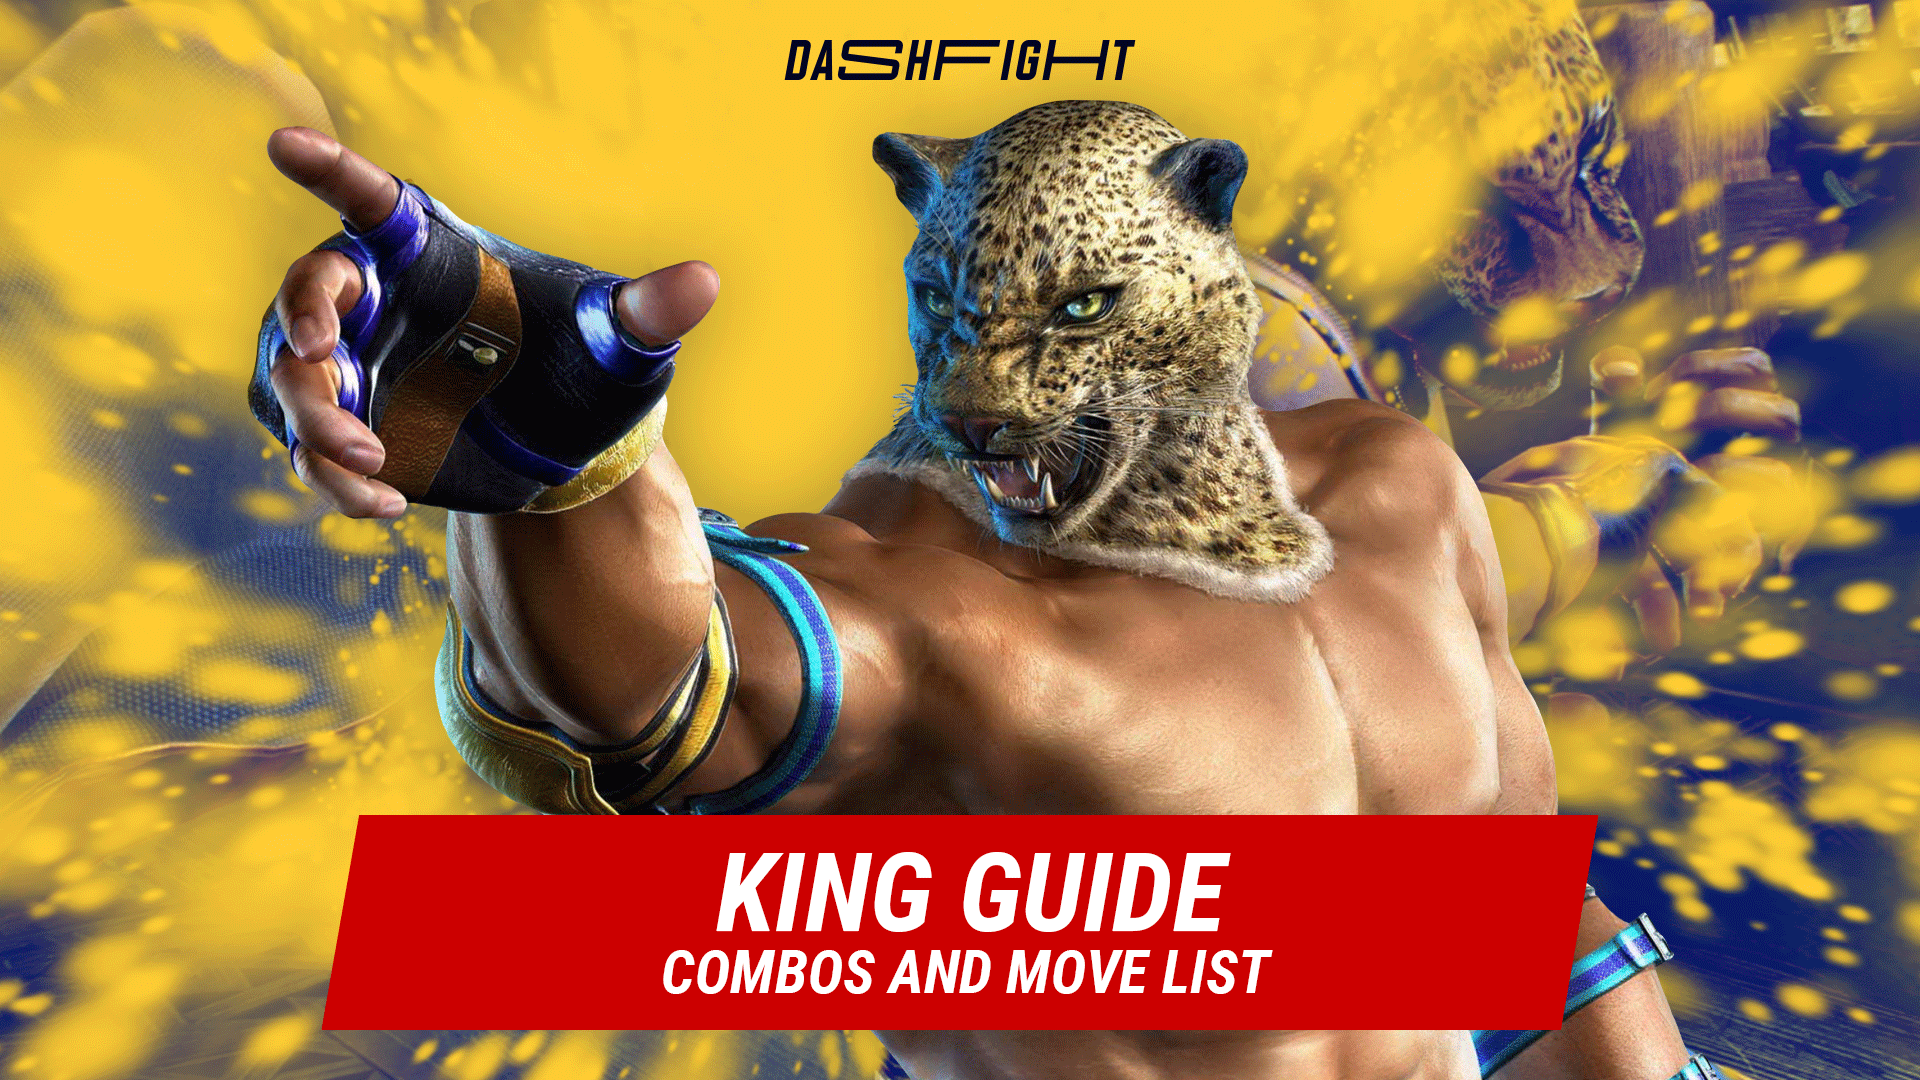 Tekken 7: King Guide - Combos and Move List